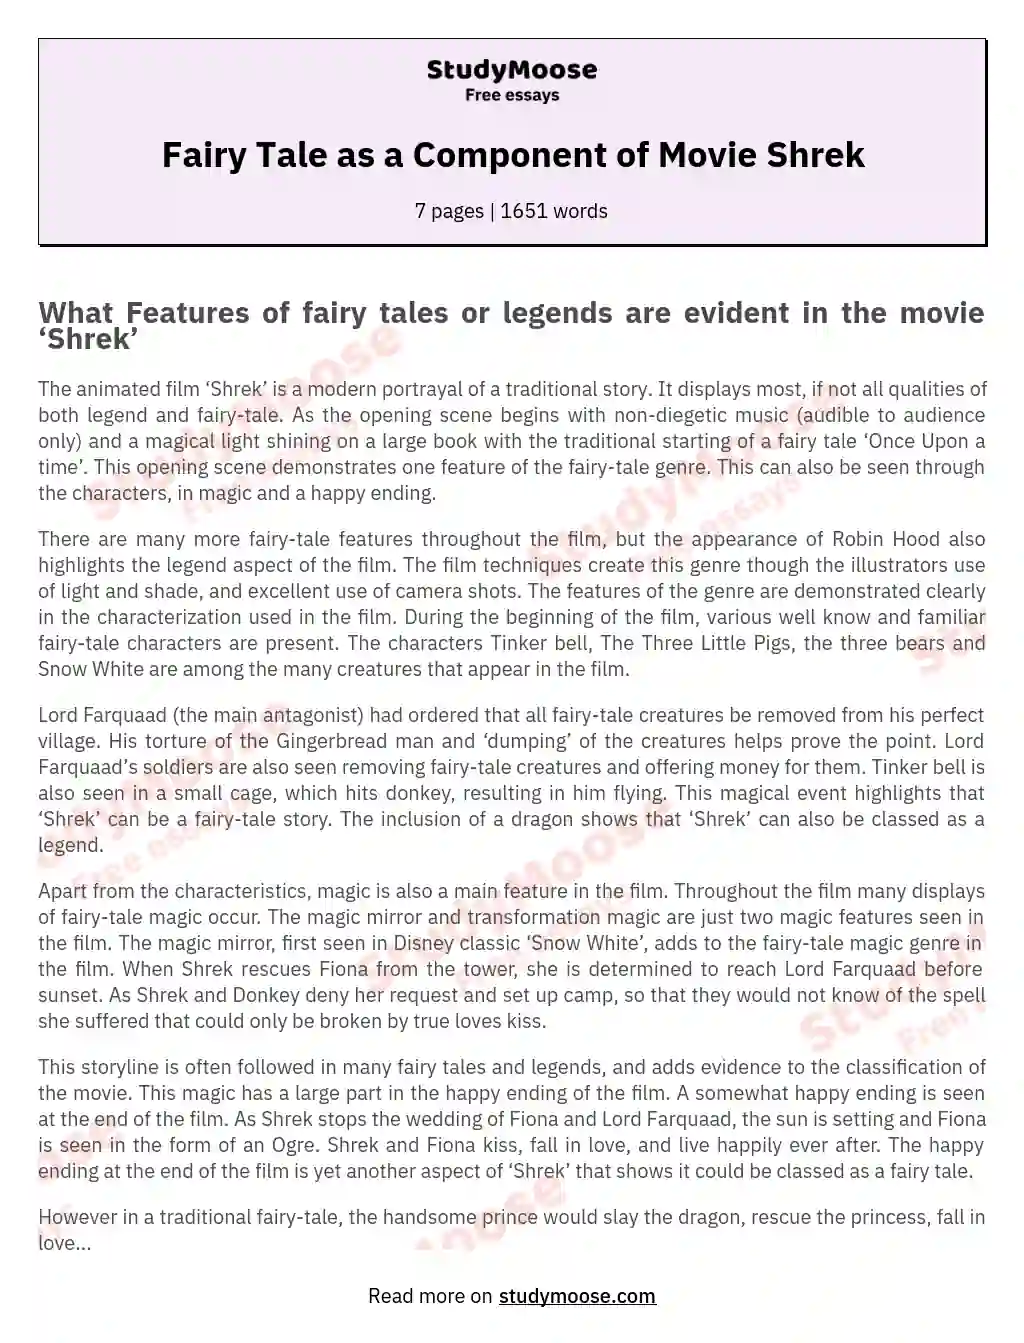 Fairy Tale as a Component of Movie Shrek